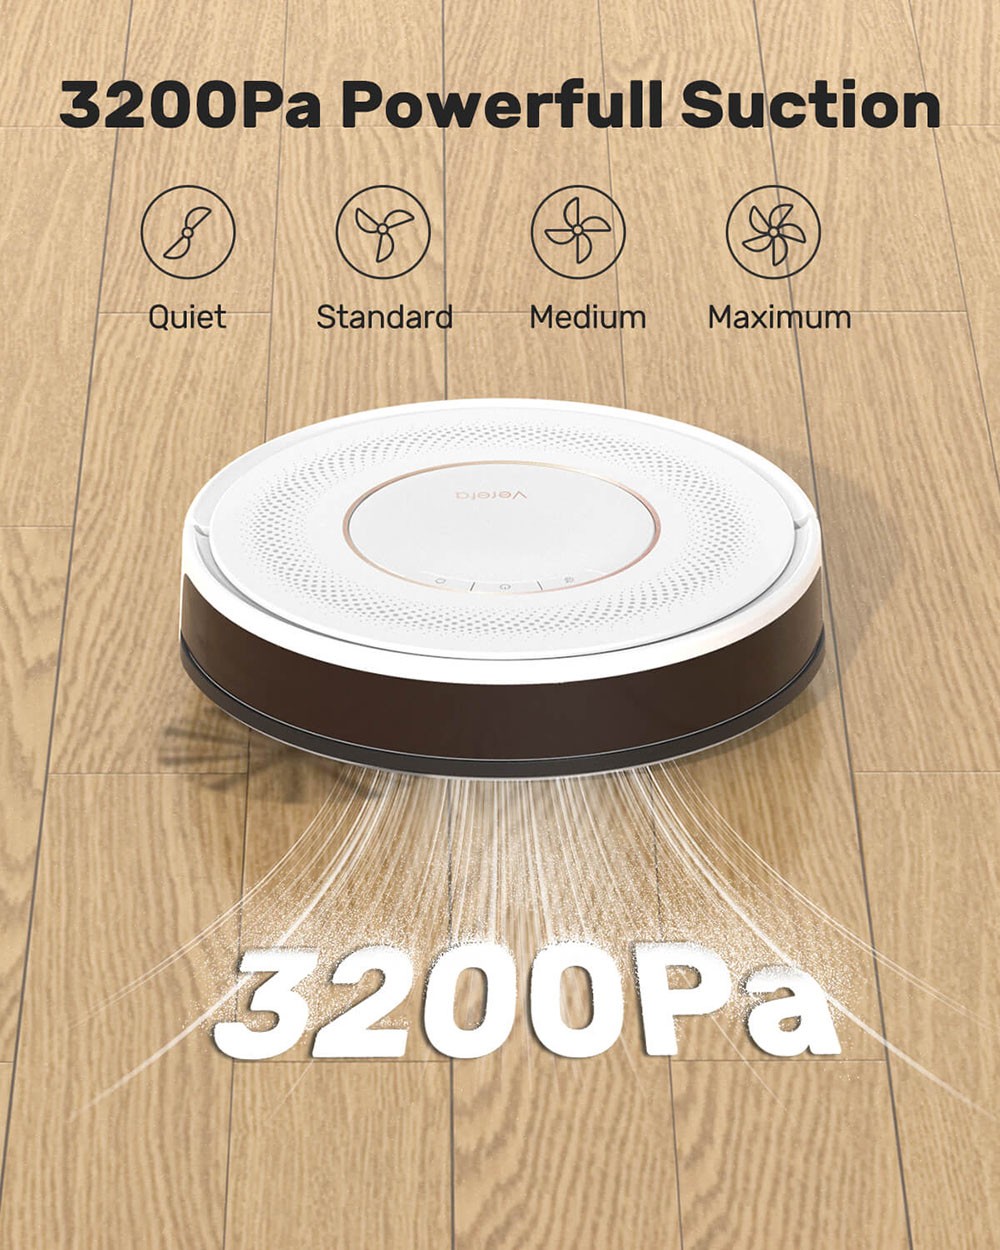 Verefa V60 Pro Robot Vacuum Cleaner, Self Emptying, 3200Pa Suction, 2L Dust Bag, Quiet Cleaning, Smart Navigation 2.0, 150Mins Max Runtime, APP/Remote Control - White